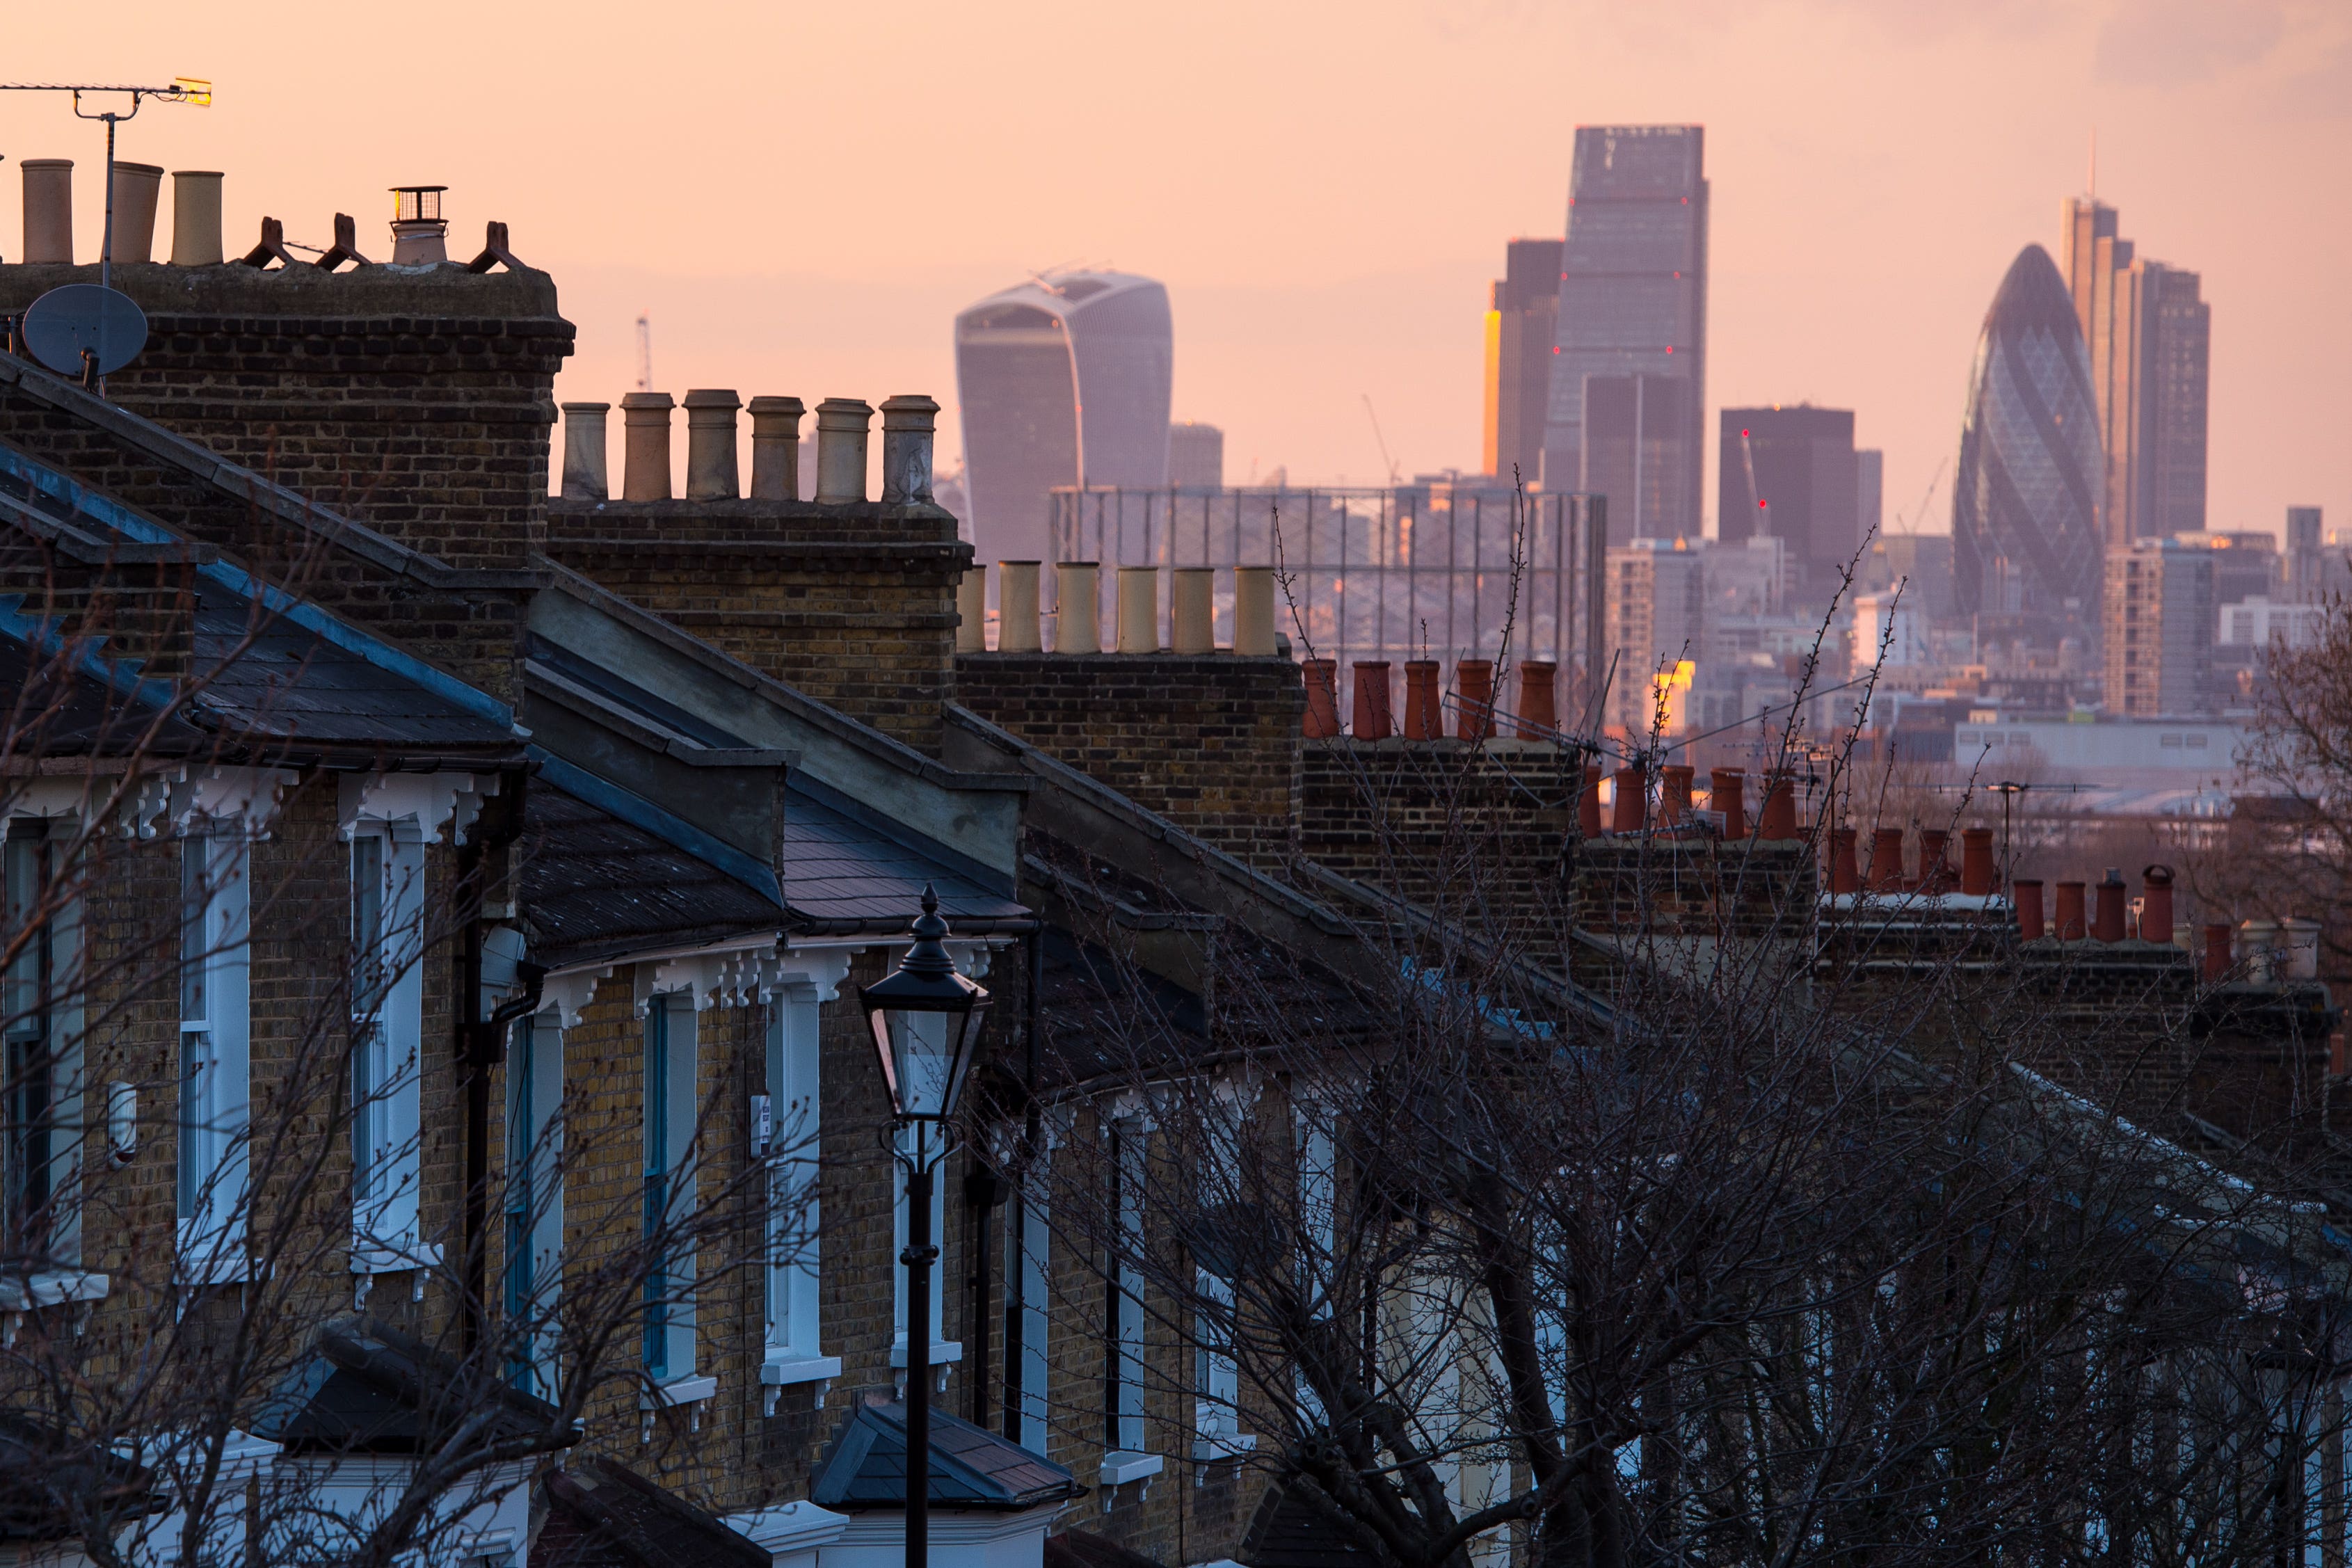 Average rents in Great Britain have now passed the £1,300 a month mark